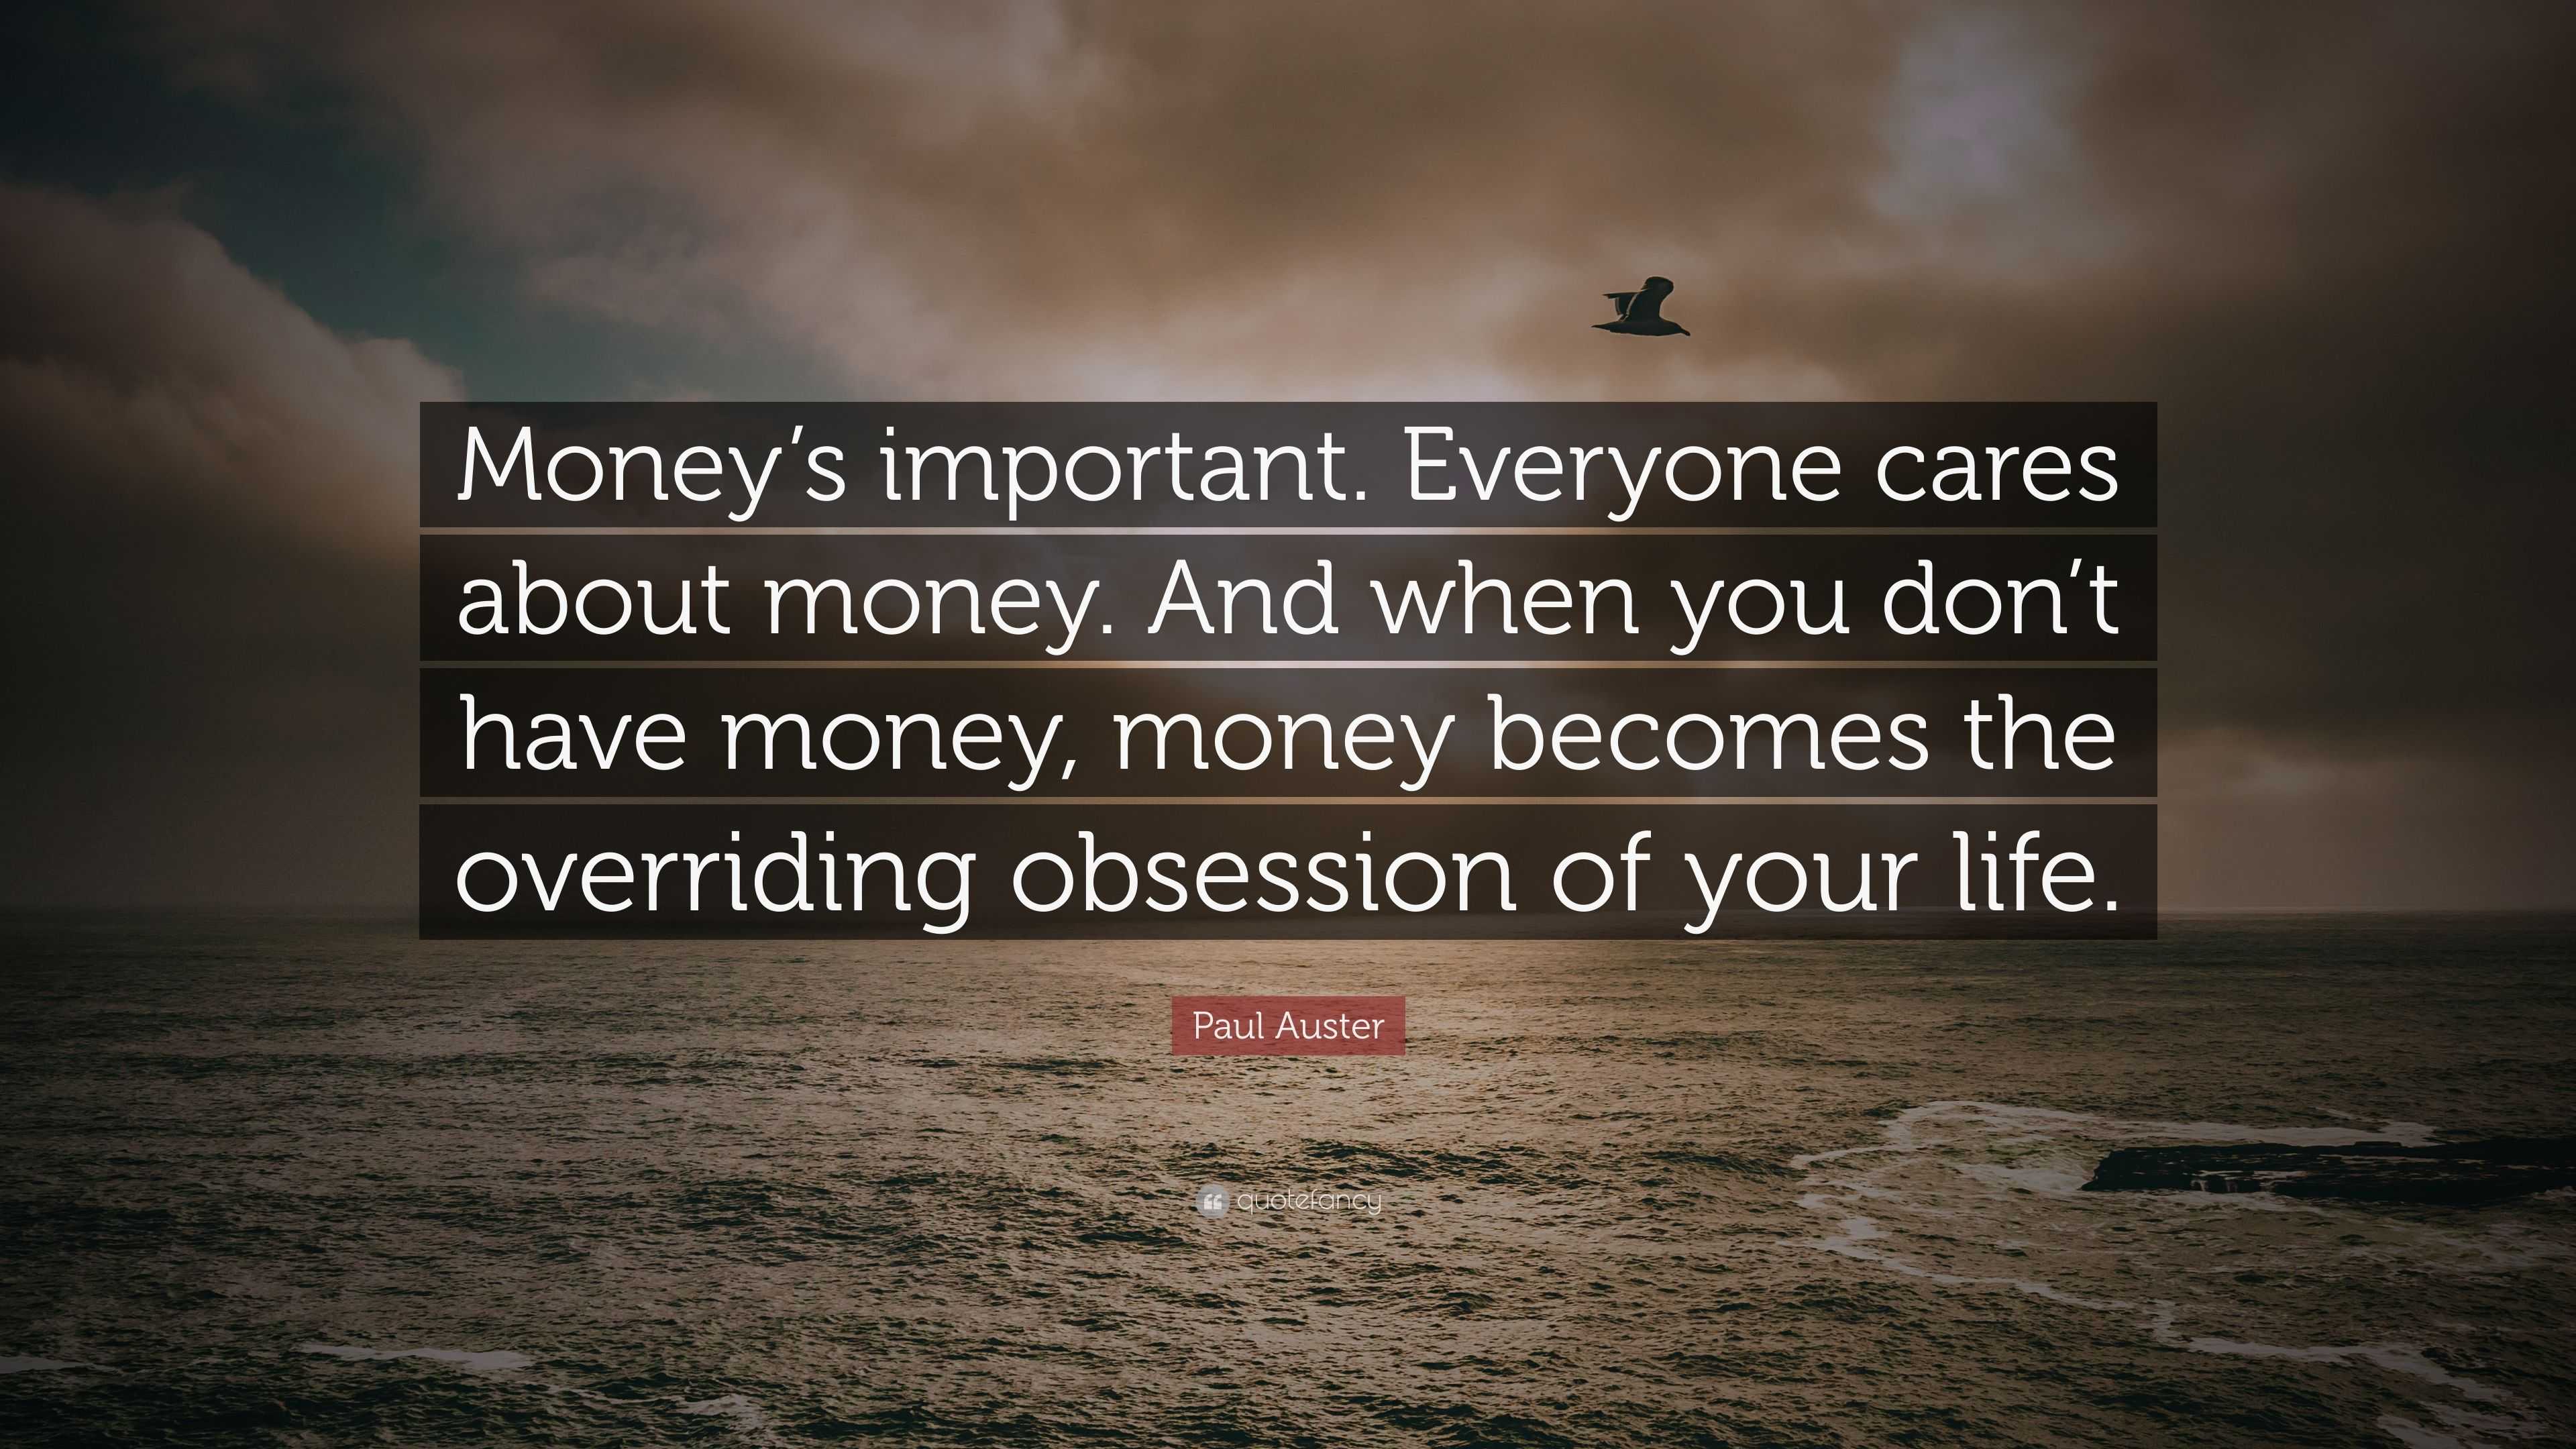 Paul Auster Quote: “Money’s important. Everyone cares about money. And